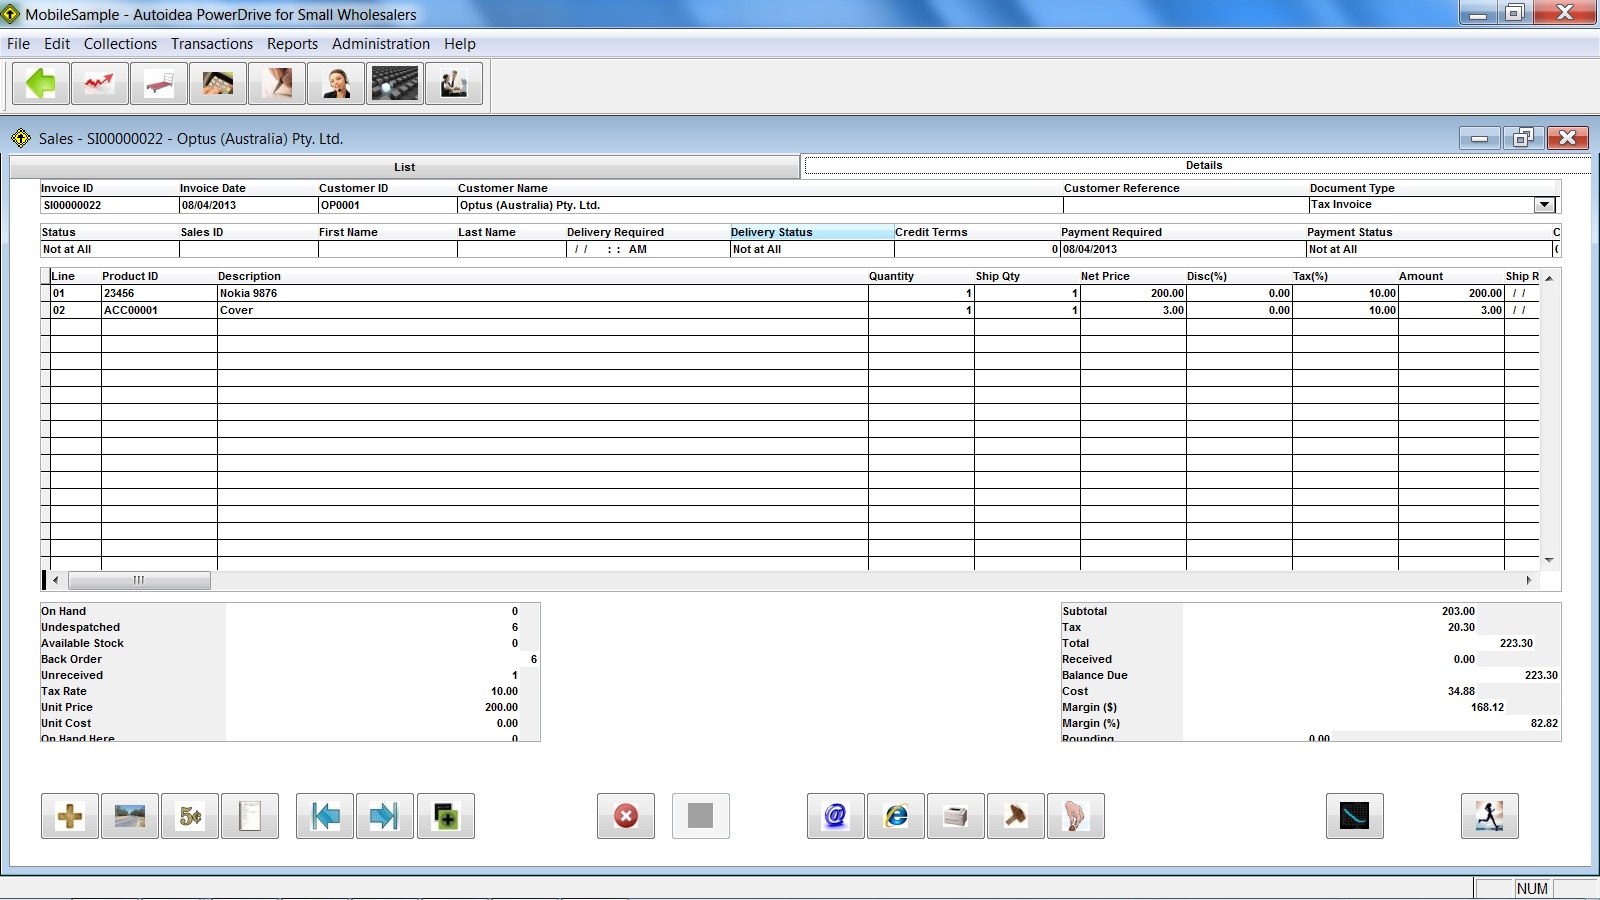 Autoidea PowerDrive for Small Wholesalers screenshot